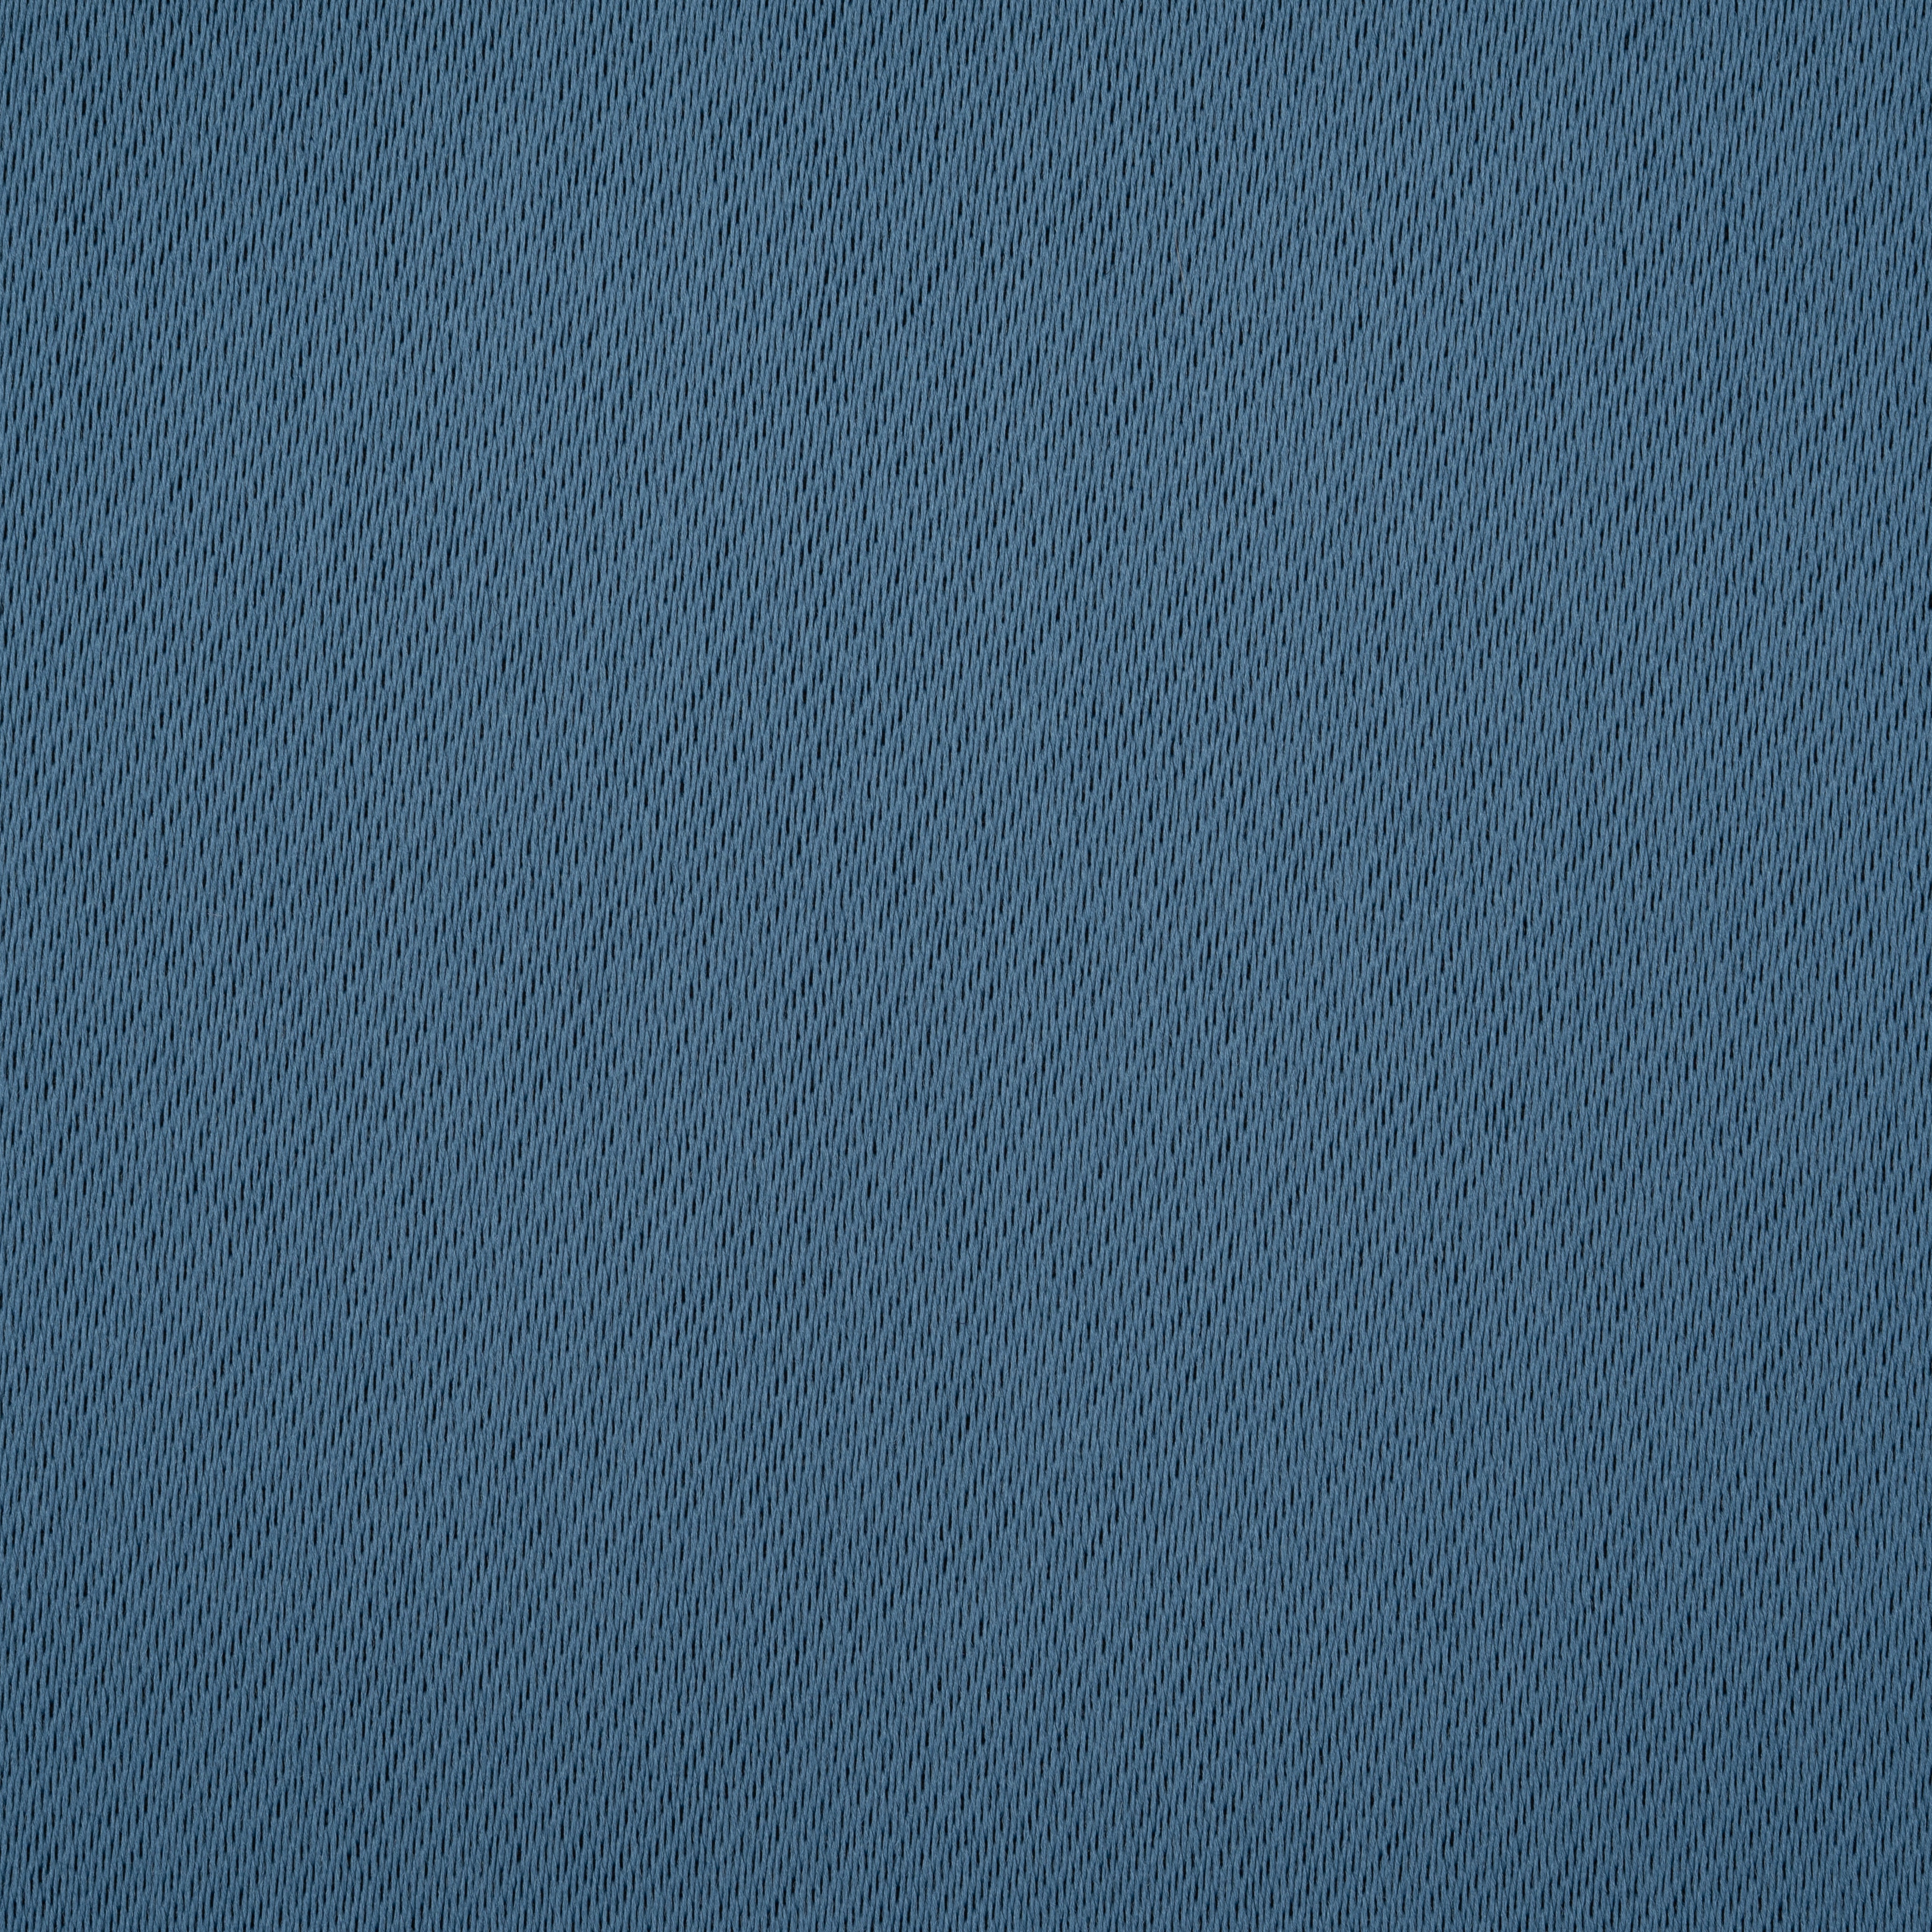 Minerals French Blue Plain Dimout Curtains